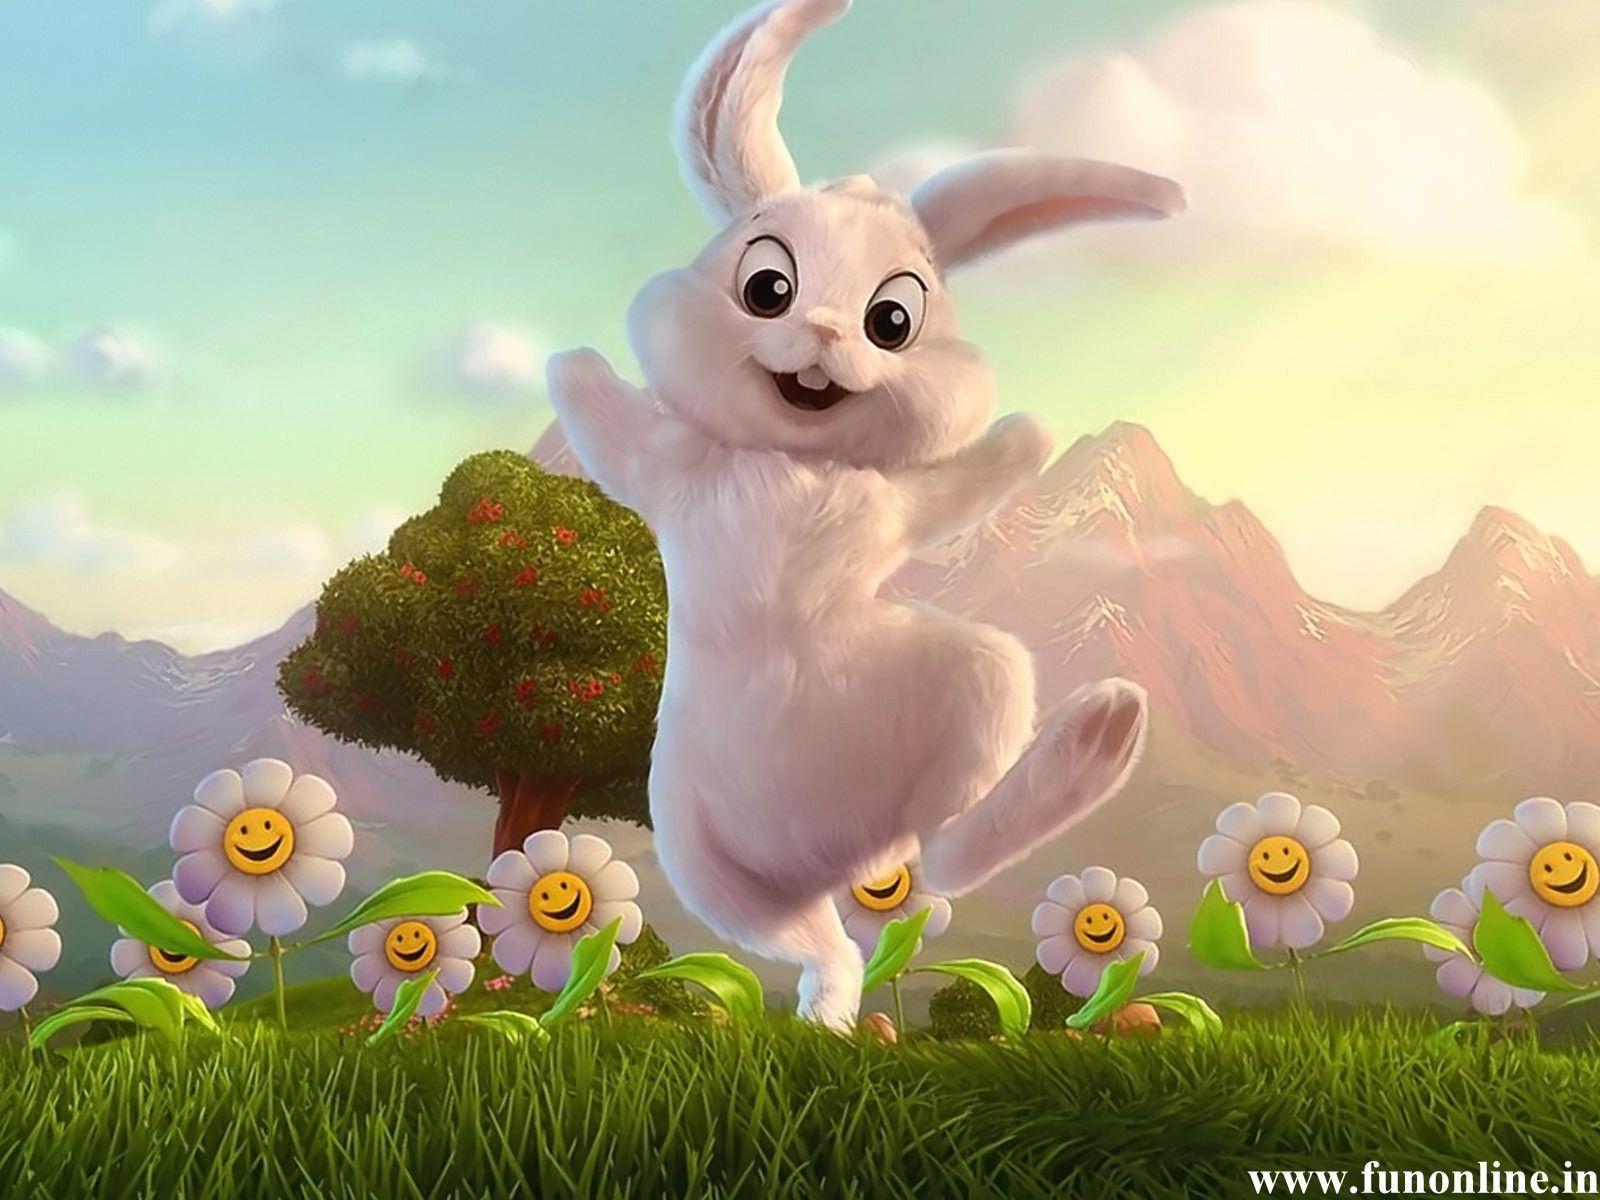 Cute bunny wallpapers